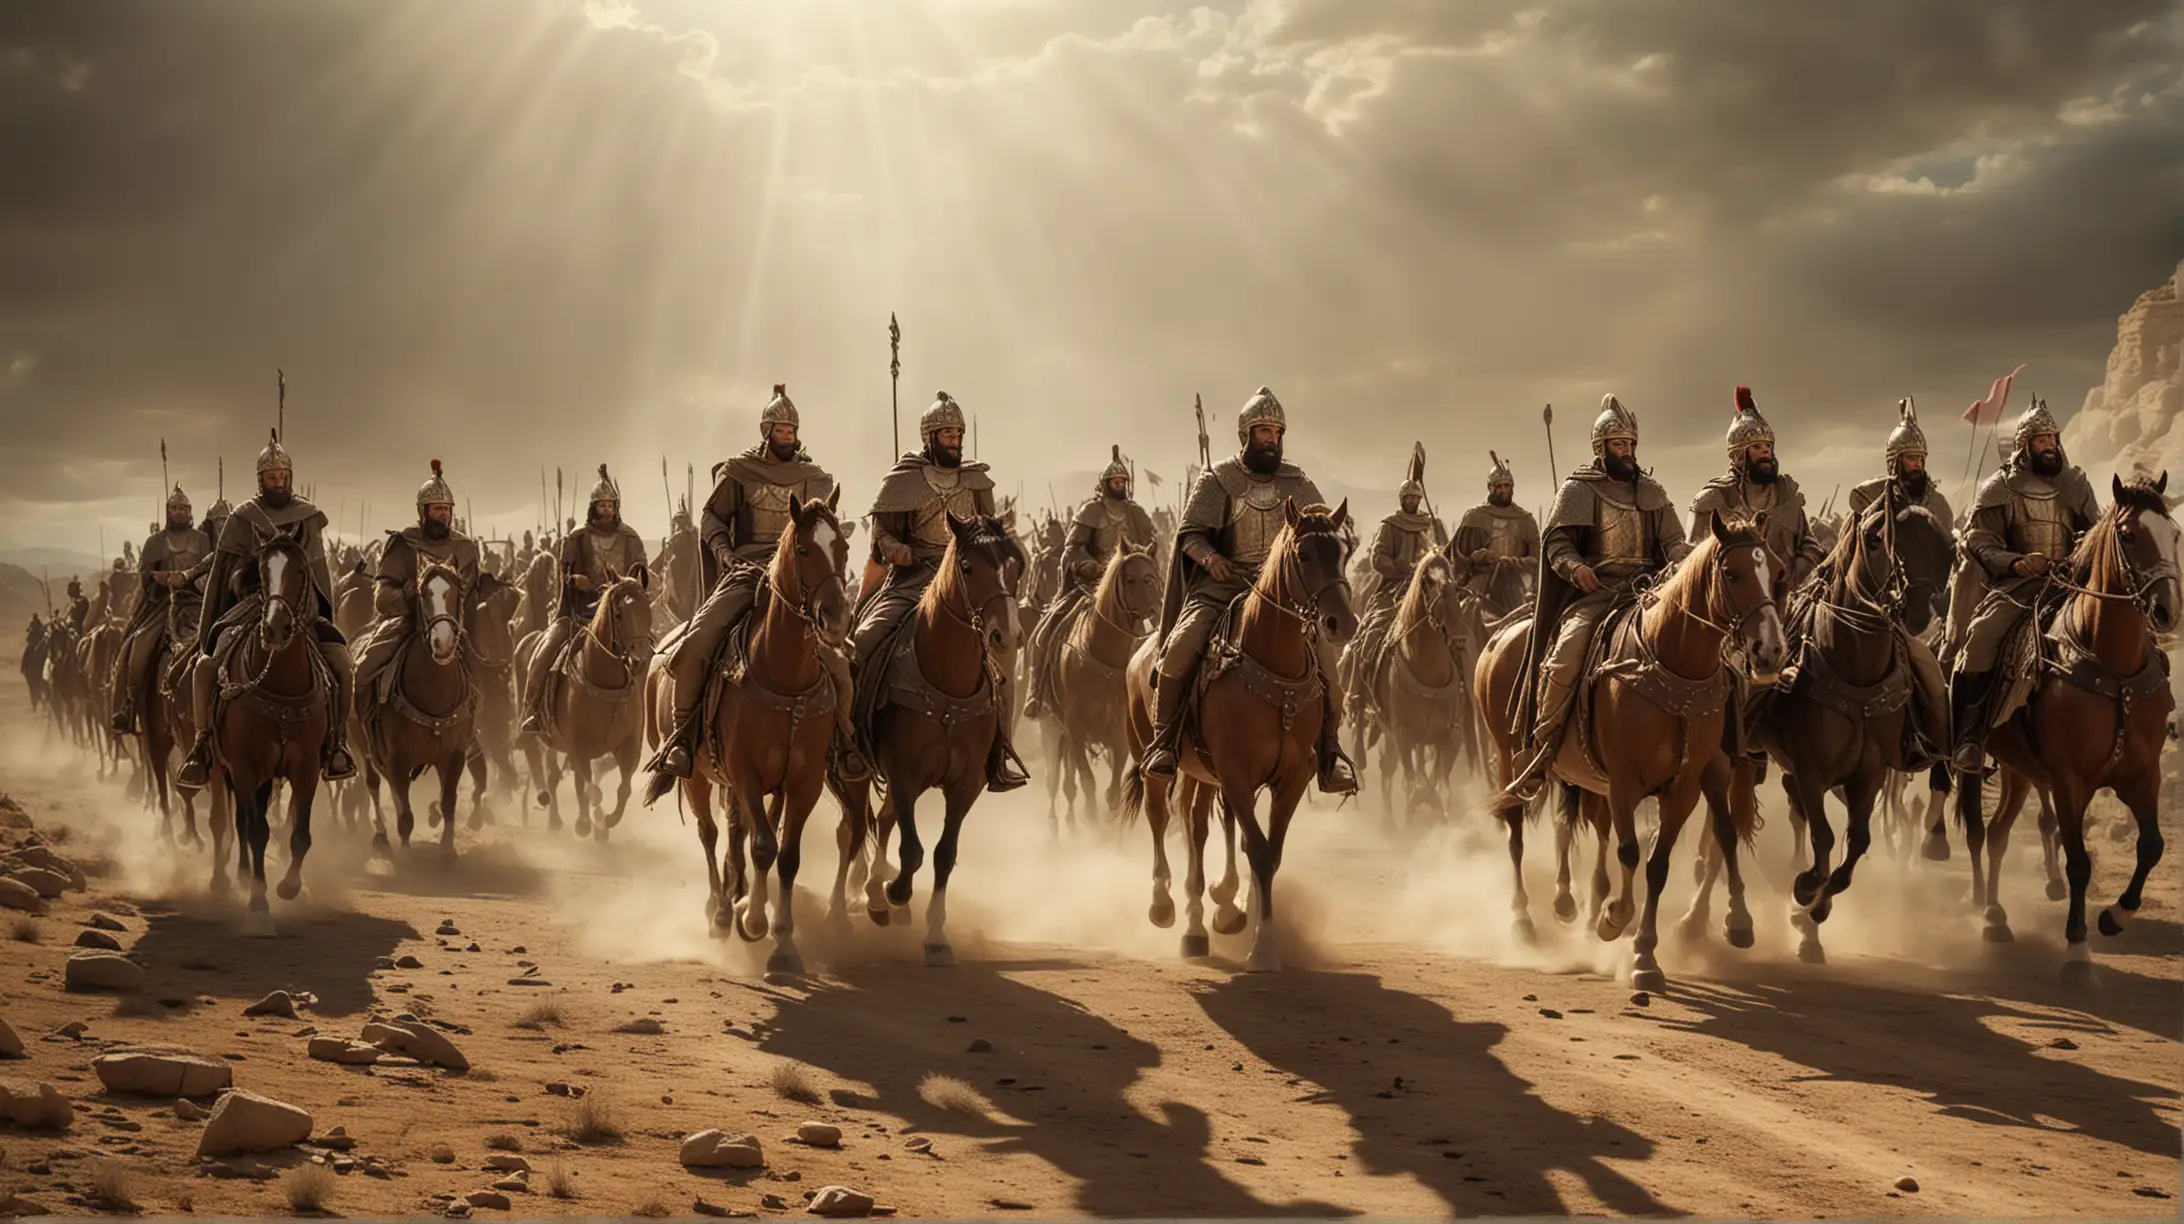 A king and his troop coming in several horse and chariots. Set during the Biblical era of Elijah.